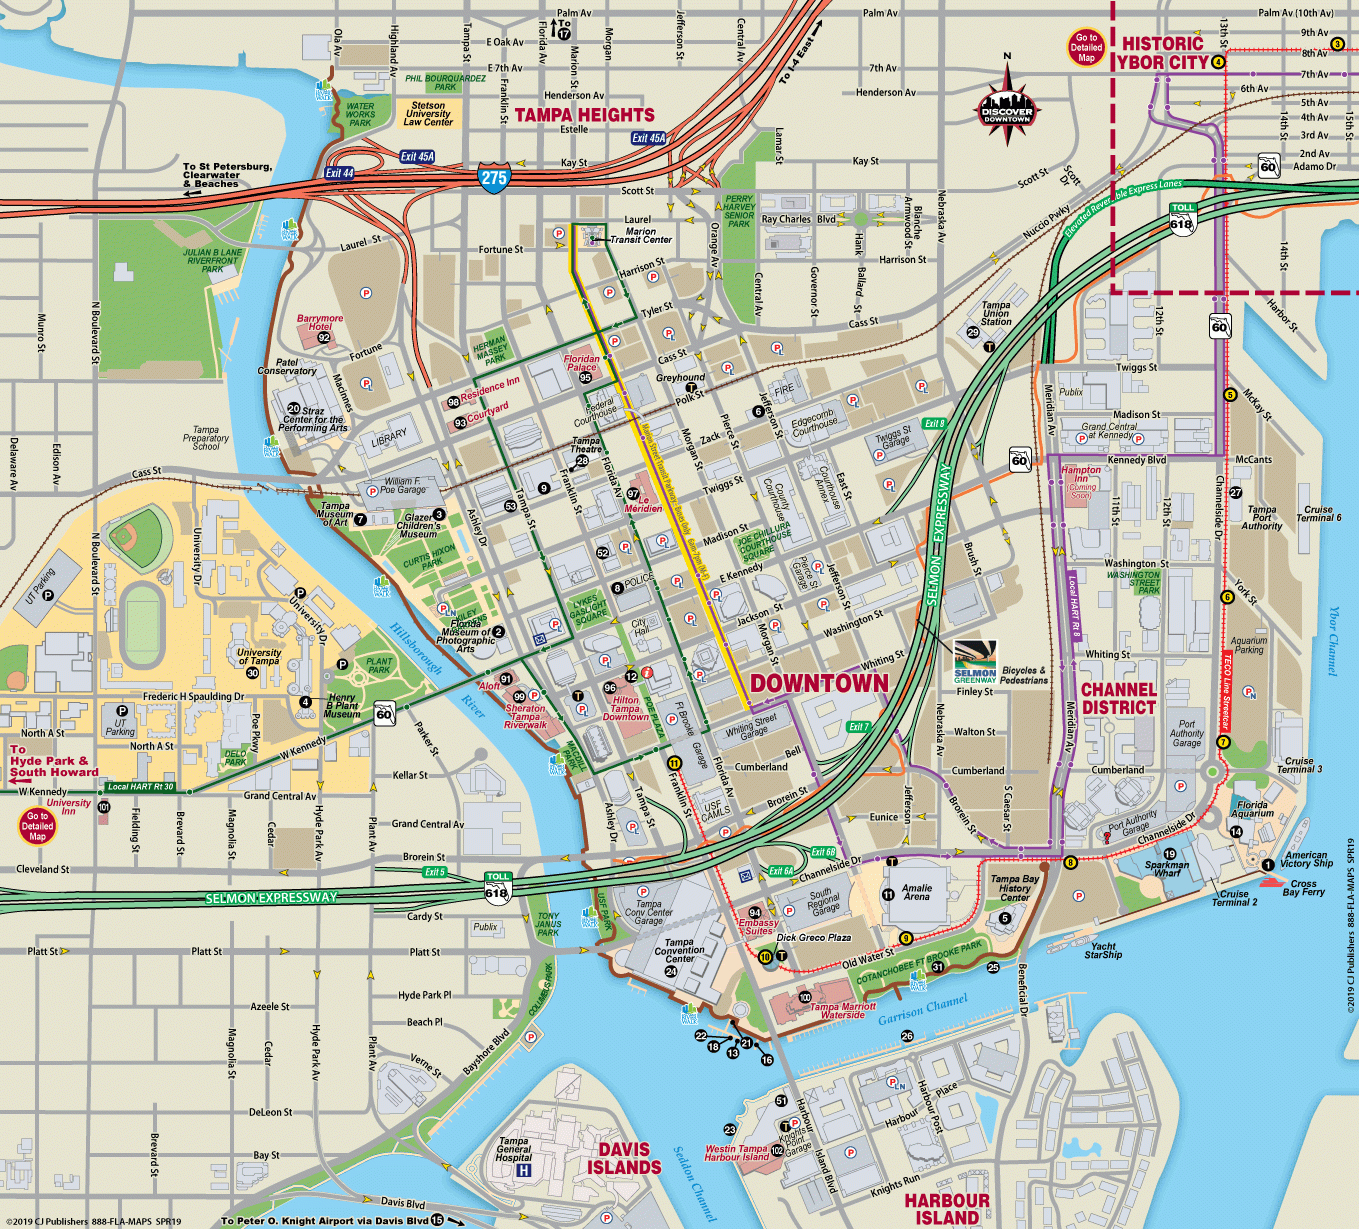 Map Of Downtown Tampa - Interactive Downtown Tampa Florida Map - Street Map Of Tampa Florida